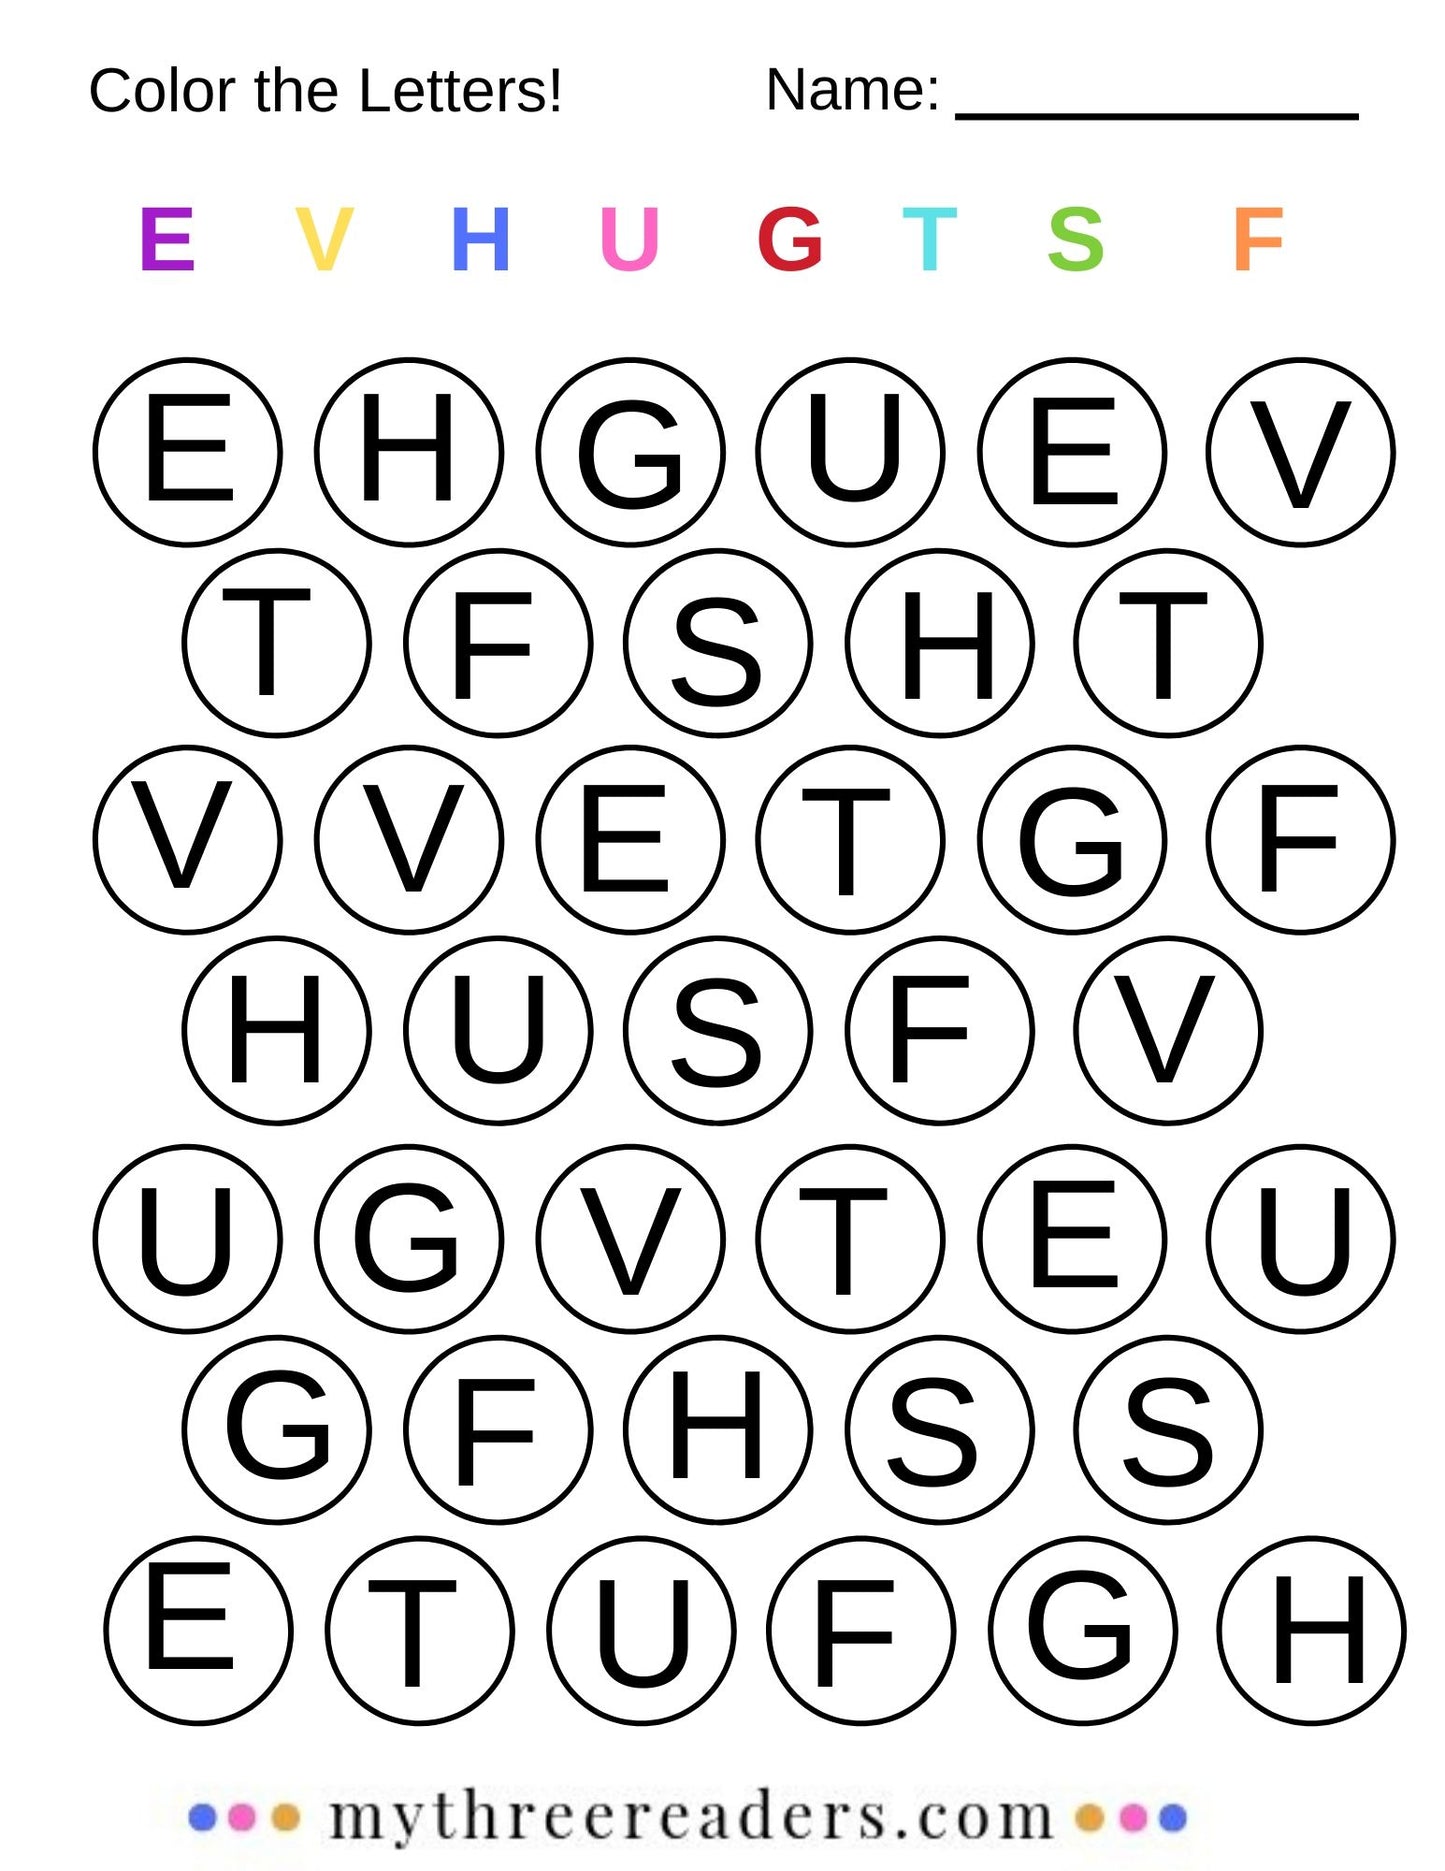 Color the Letter Printable Pages